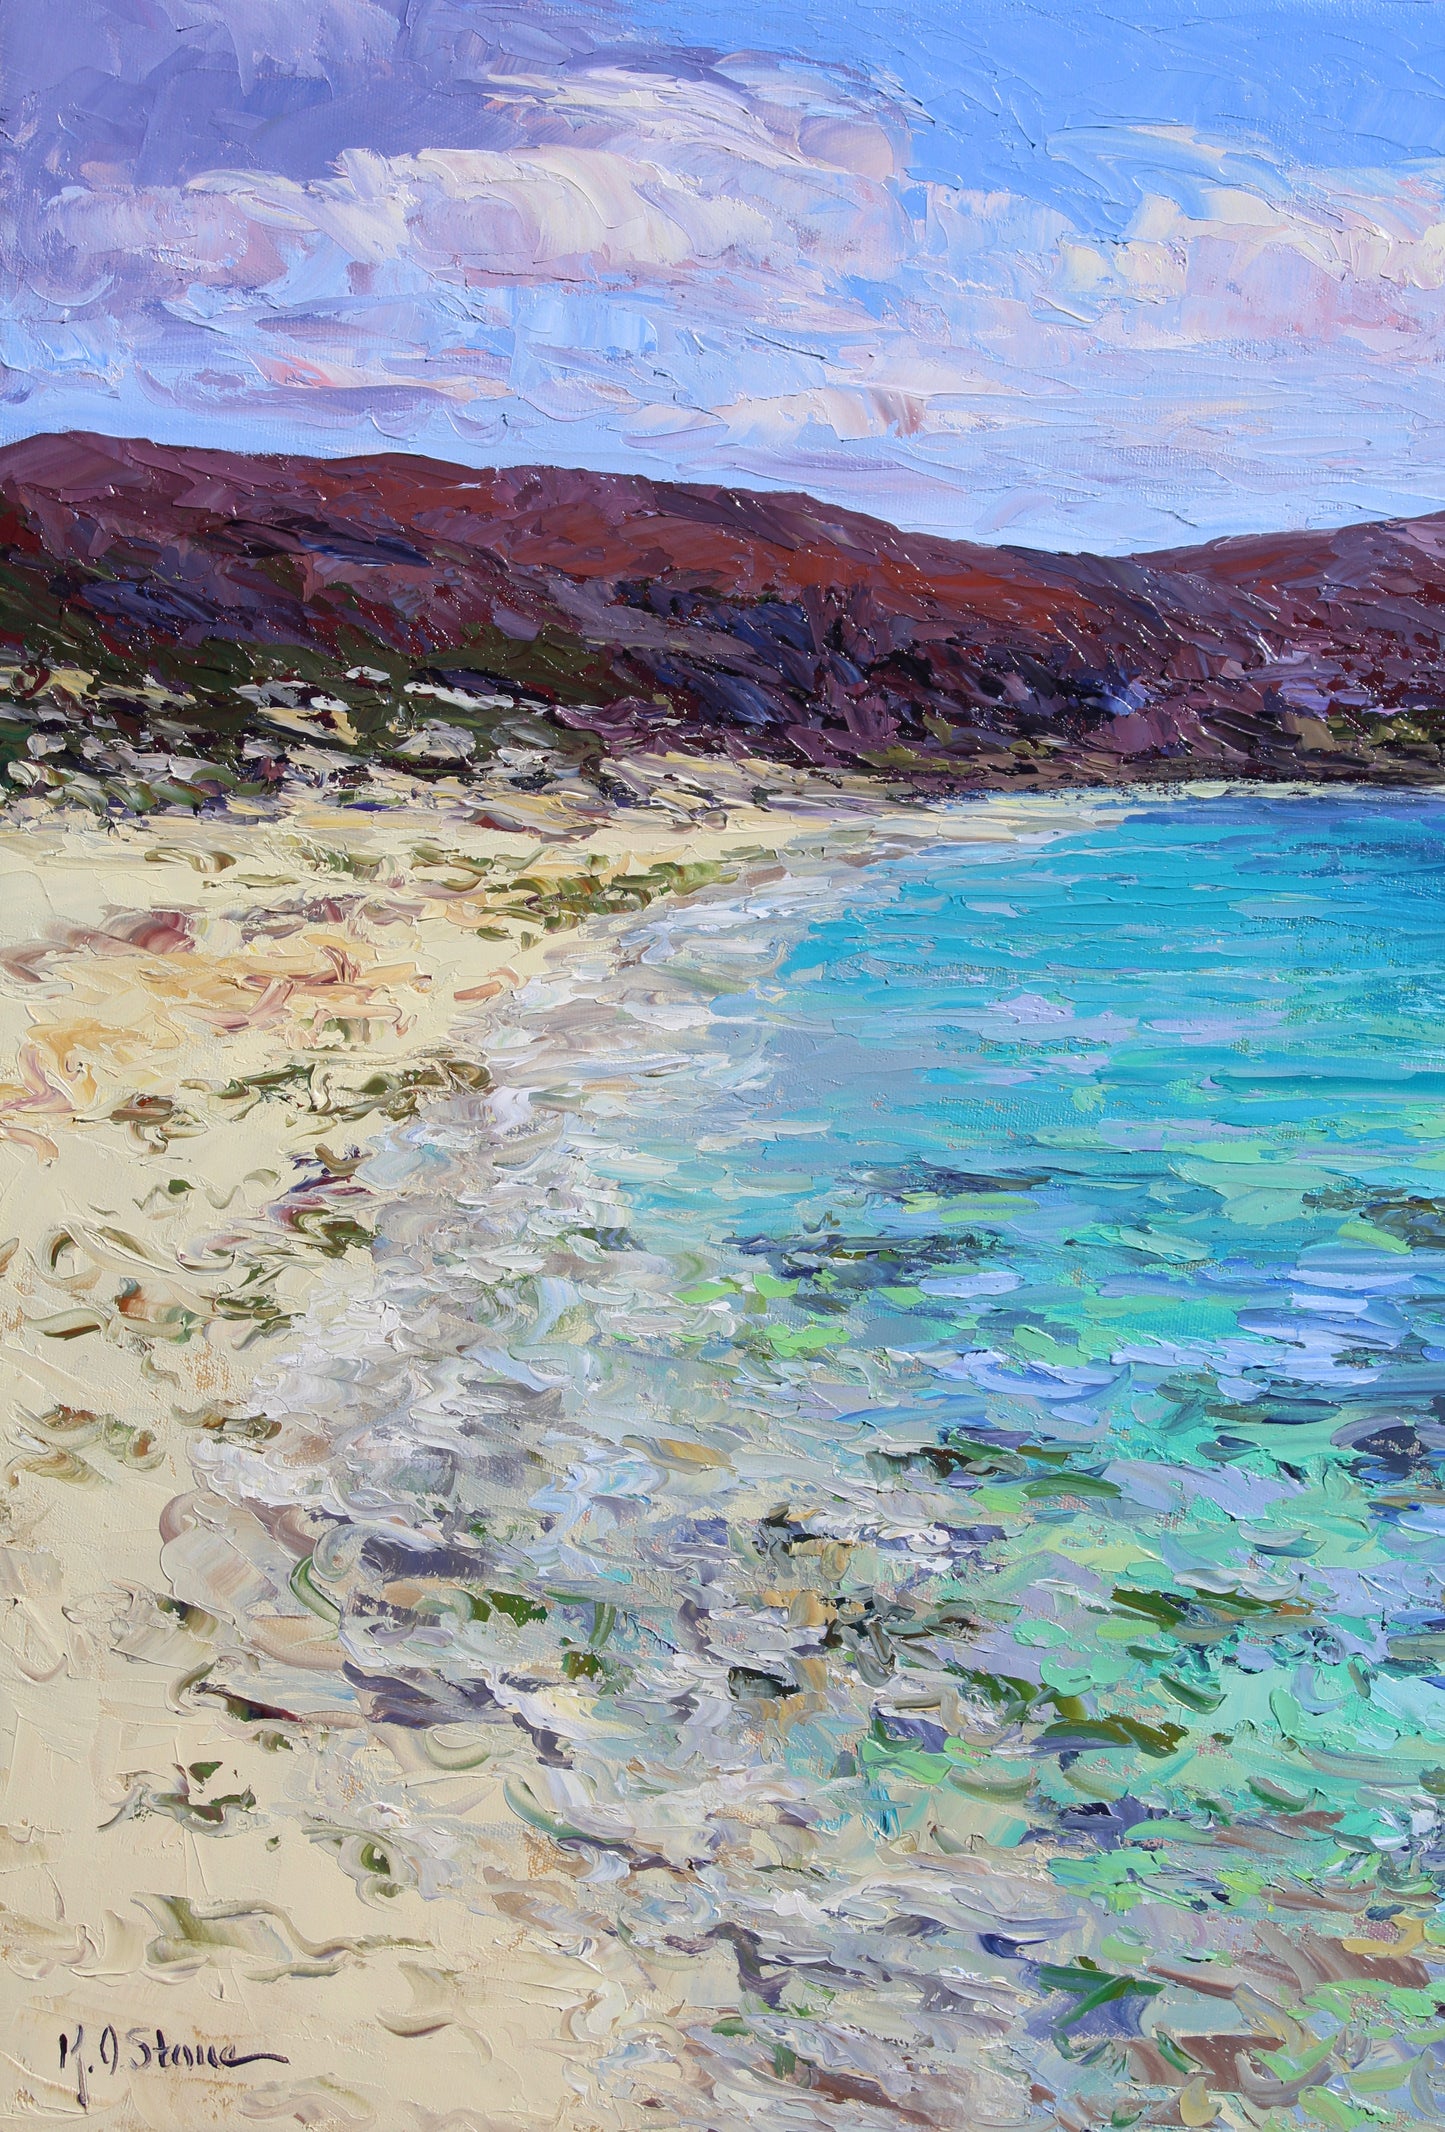 Another Day In Paradise, An Original 24" x  30" Seascape Oil On Canvas Of Balandra Bay